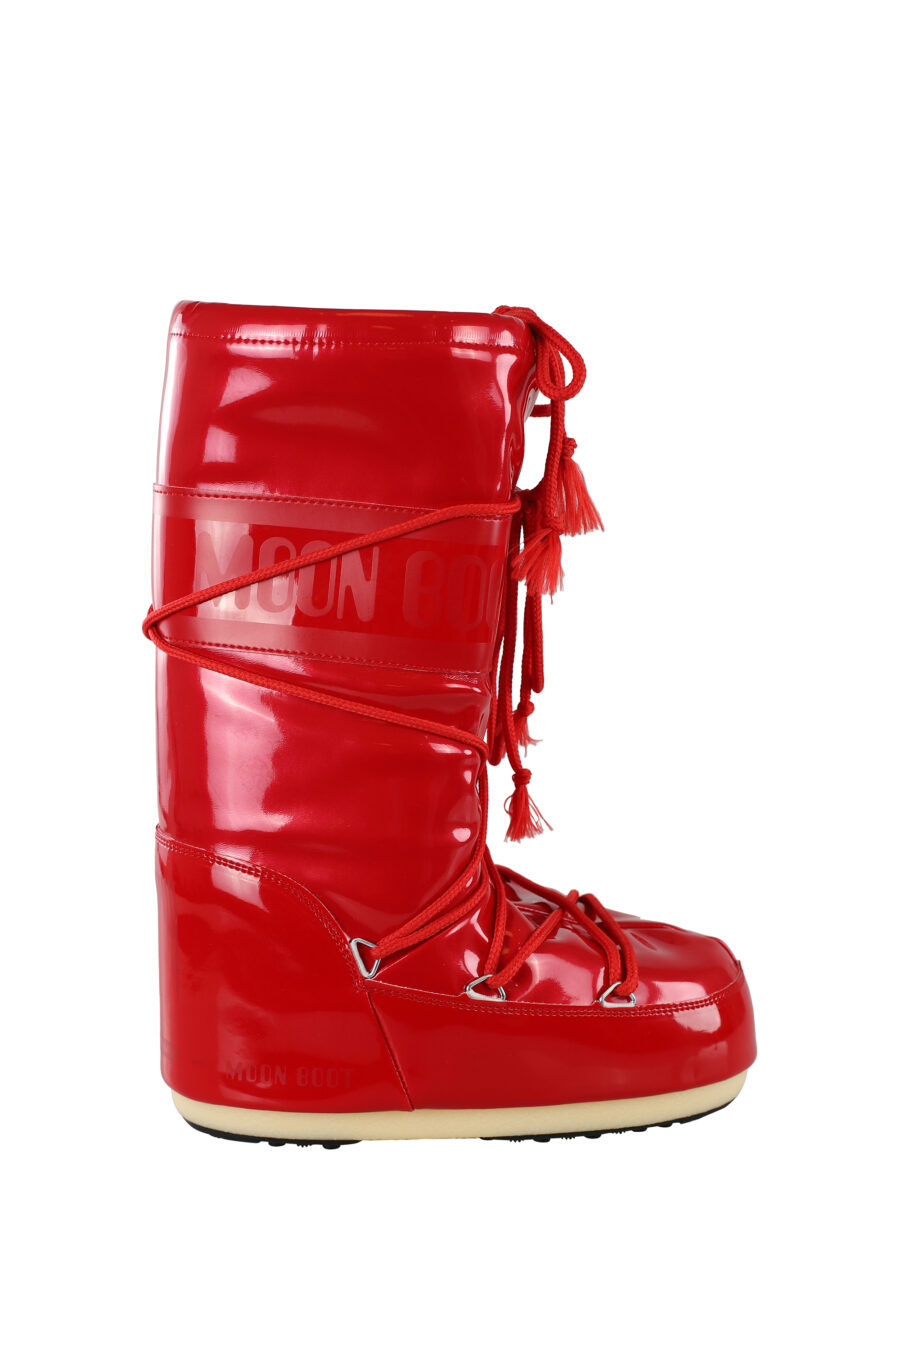 Red snow boots with monochrome logo - IMG 6748